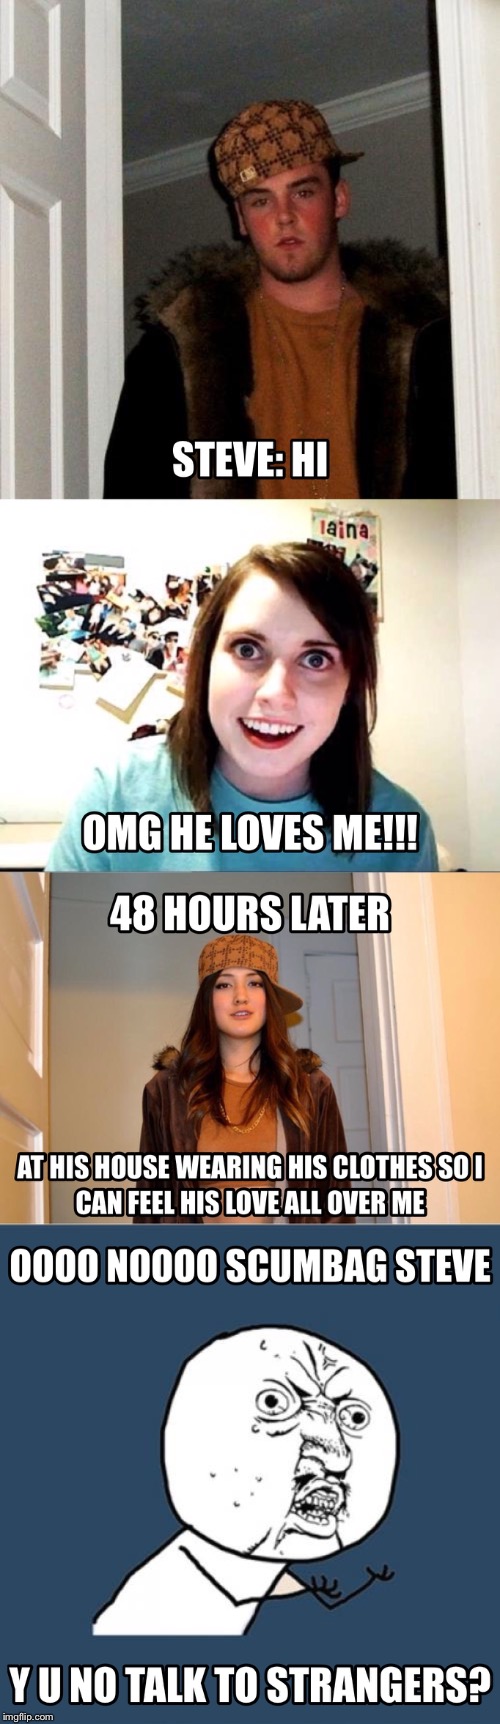 Overly Attached Scumbag Steve Internet Stalker Girlfriend. | image tagged in scumbag steve,overly attached girlfriend,scumbag stephanie,y u no,stalker,memes | made w/ Imgflip meme maker